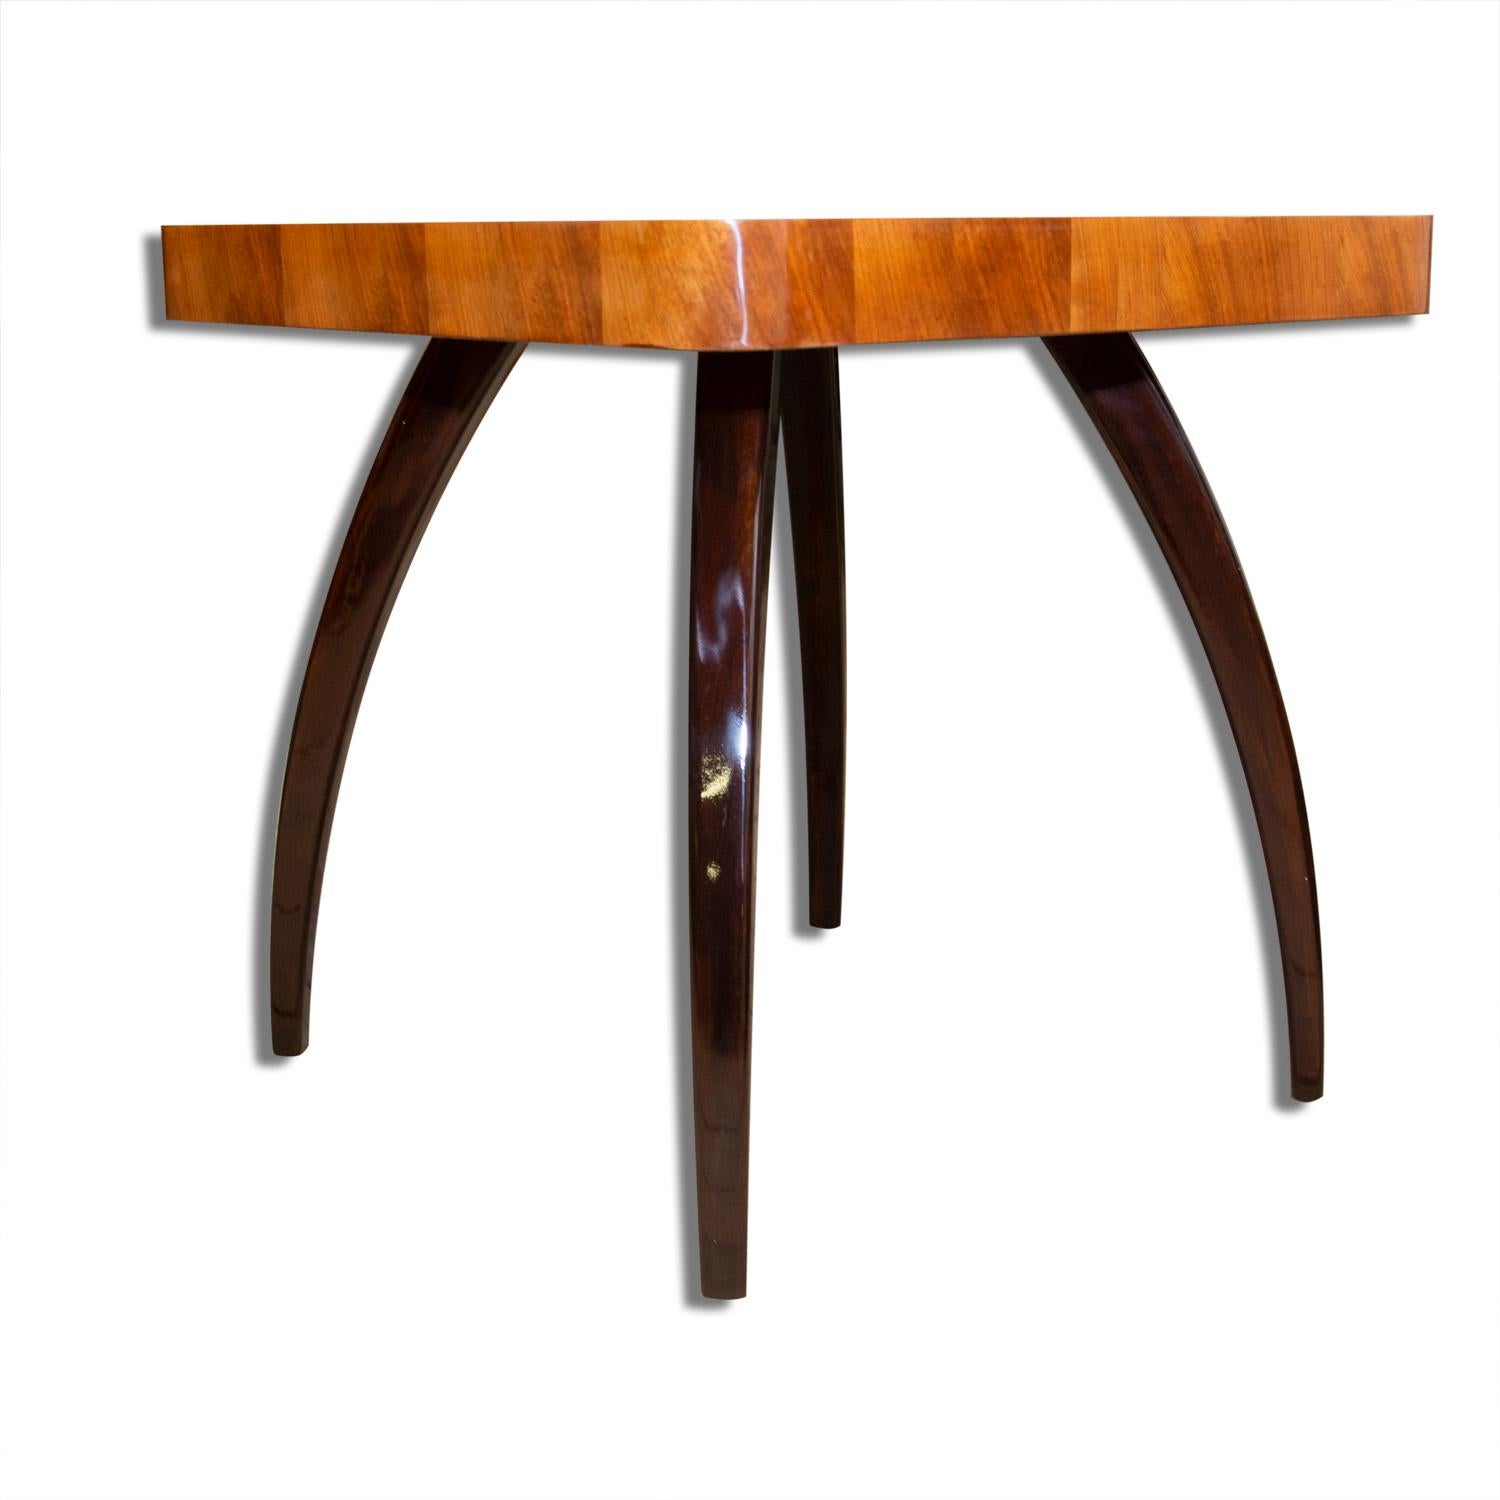 Mid-20th Century Walnut Spider Table H-259 by Jindrich Halabala, 1950s, Czechoslovakia For Sale